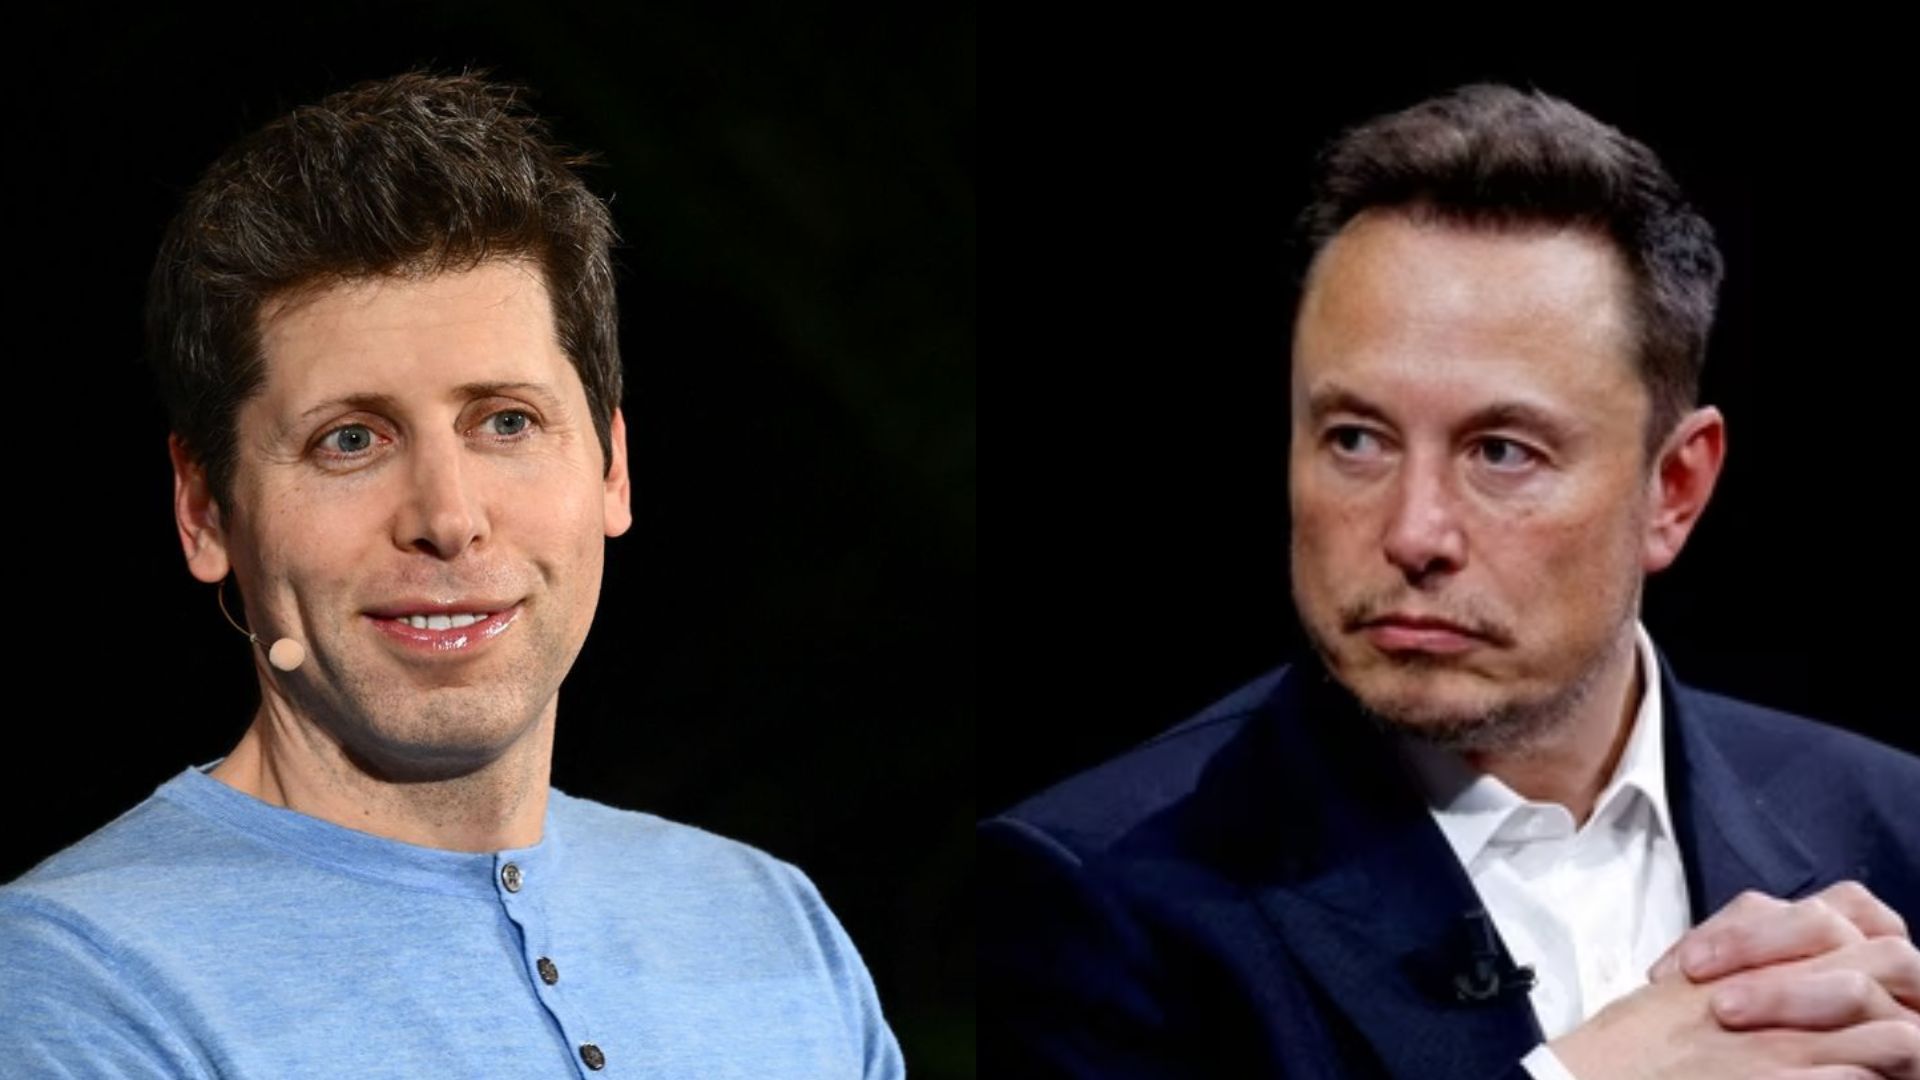 Elon Musk sues OpenAI, alleging breach of contract and putting profits over humanity